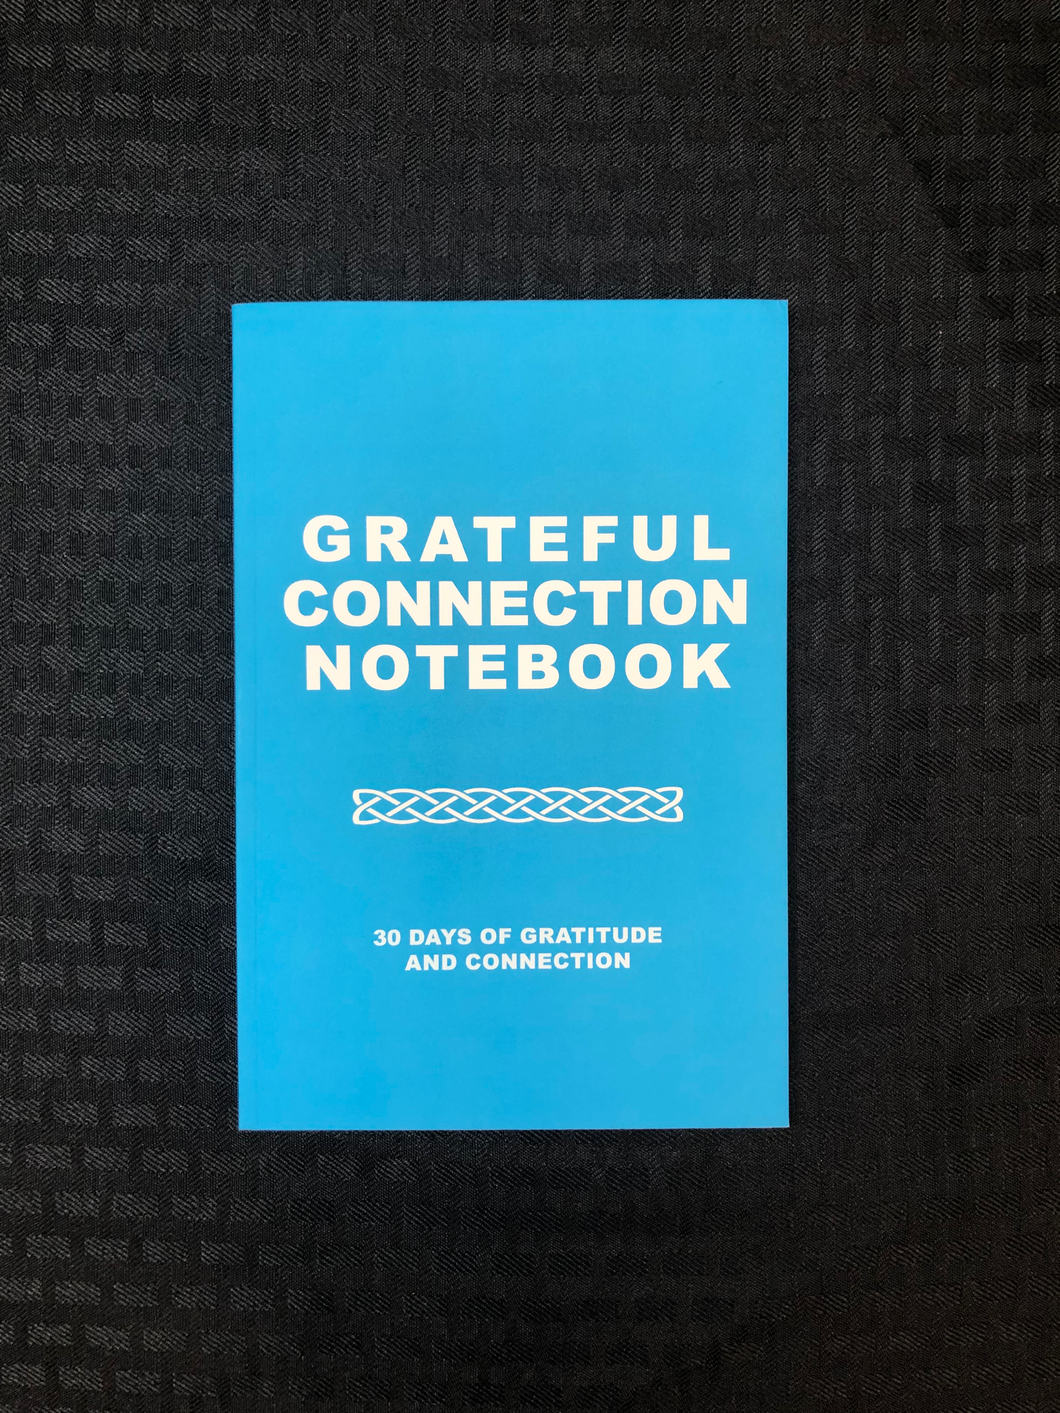 Grateful Connection Notebook - 30 Days of Gratitude and Connection